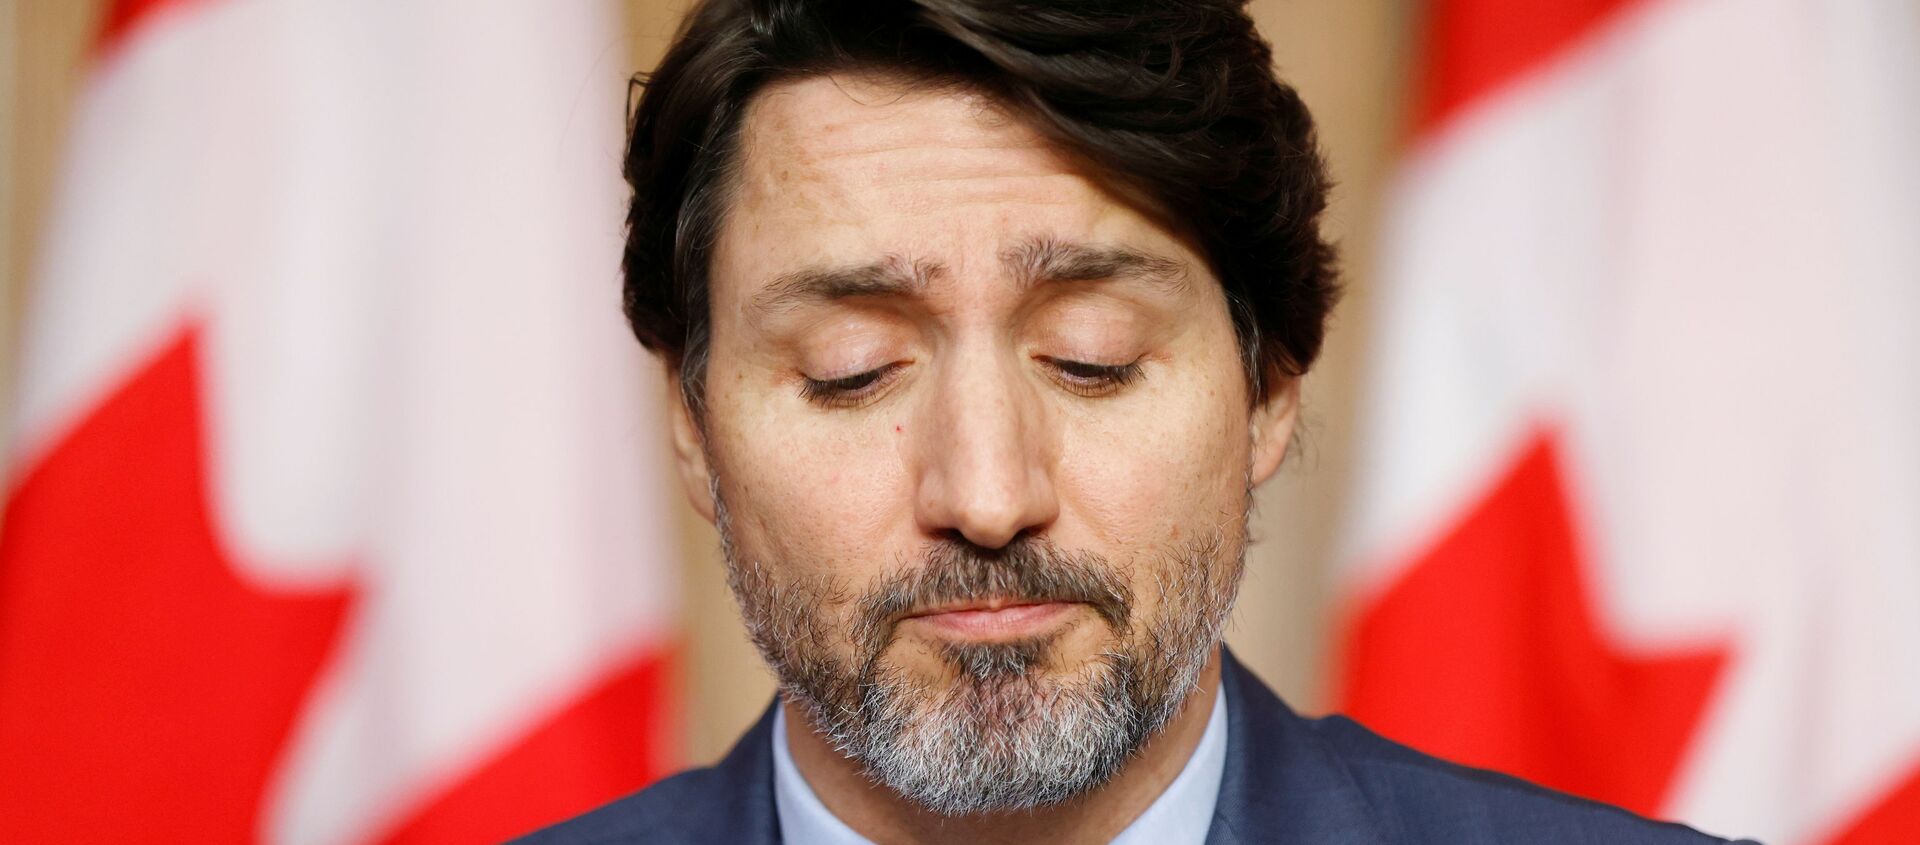 Canada's Prime Minister Justin Trudeau attends a news conference, as efforts continue to help slow the spread of the coronavirus disease (COVID-19), in Ottawa, Ontario, Canada, 19 March 2021 - Sputnik International, 1920, 15.04.2021